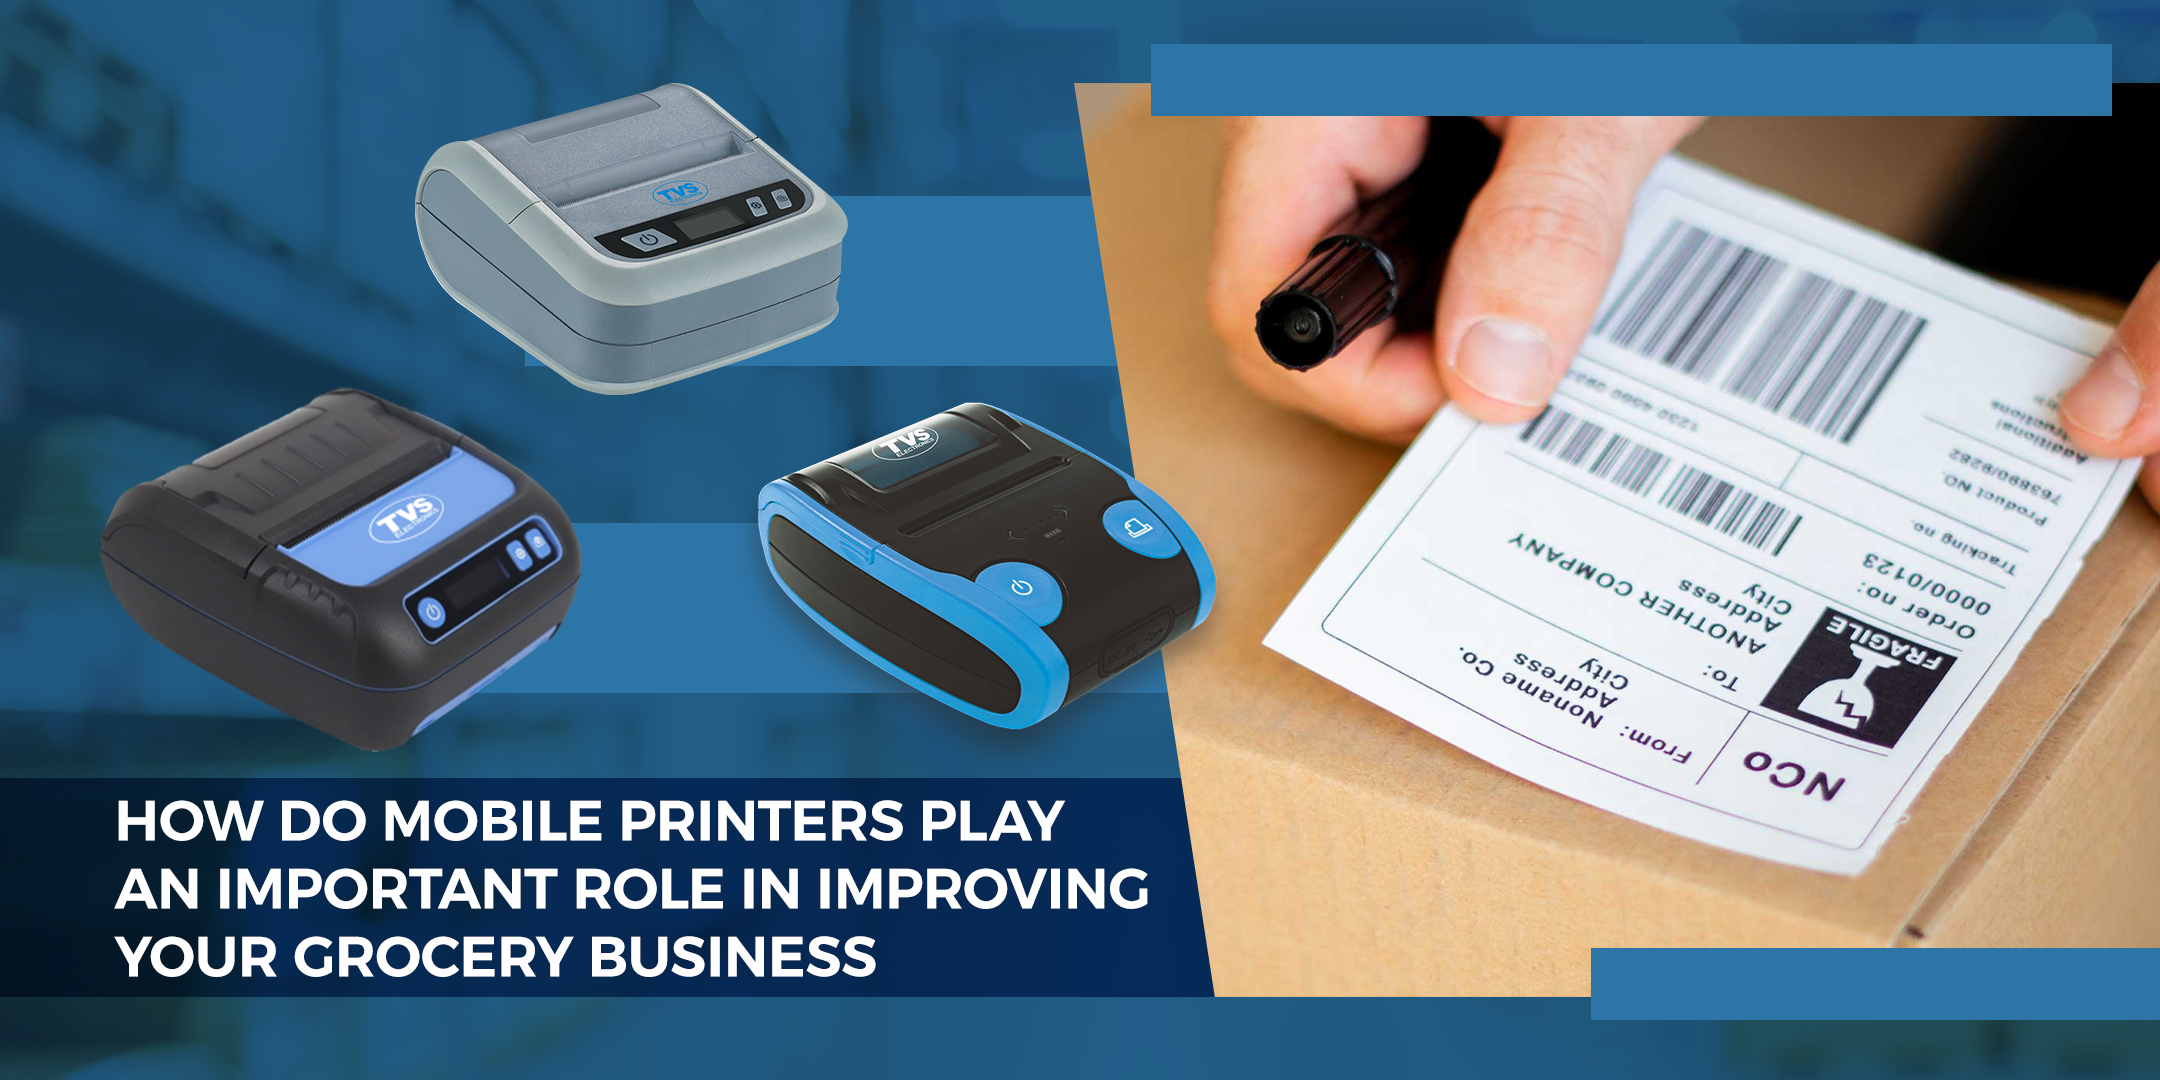 How do mobile printers play an essential role in improving your grocery business?